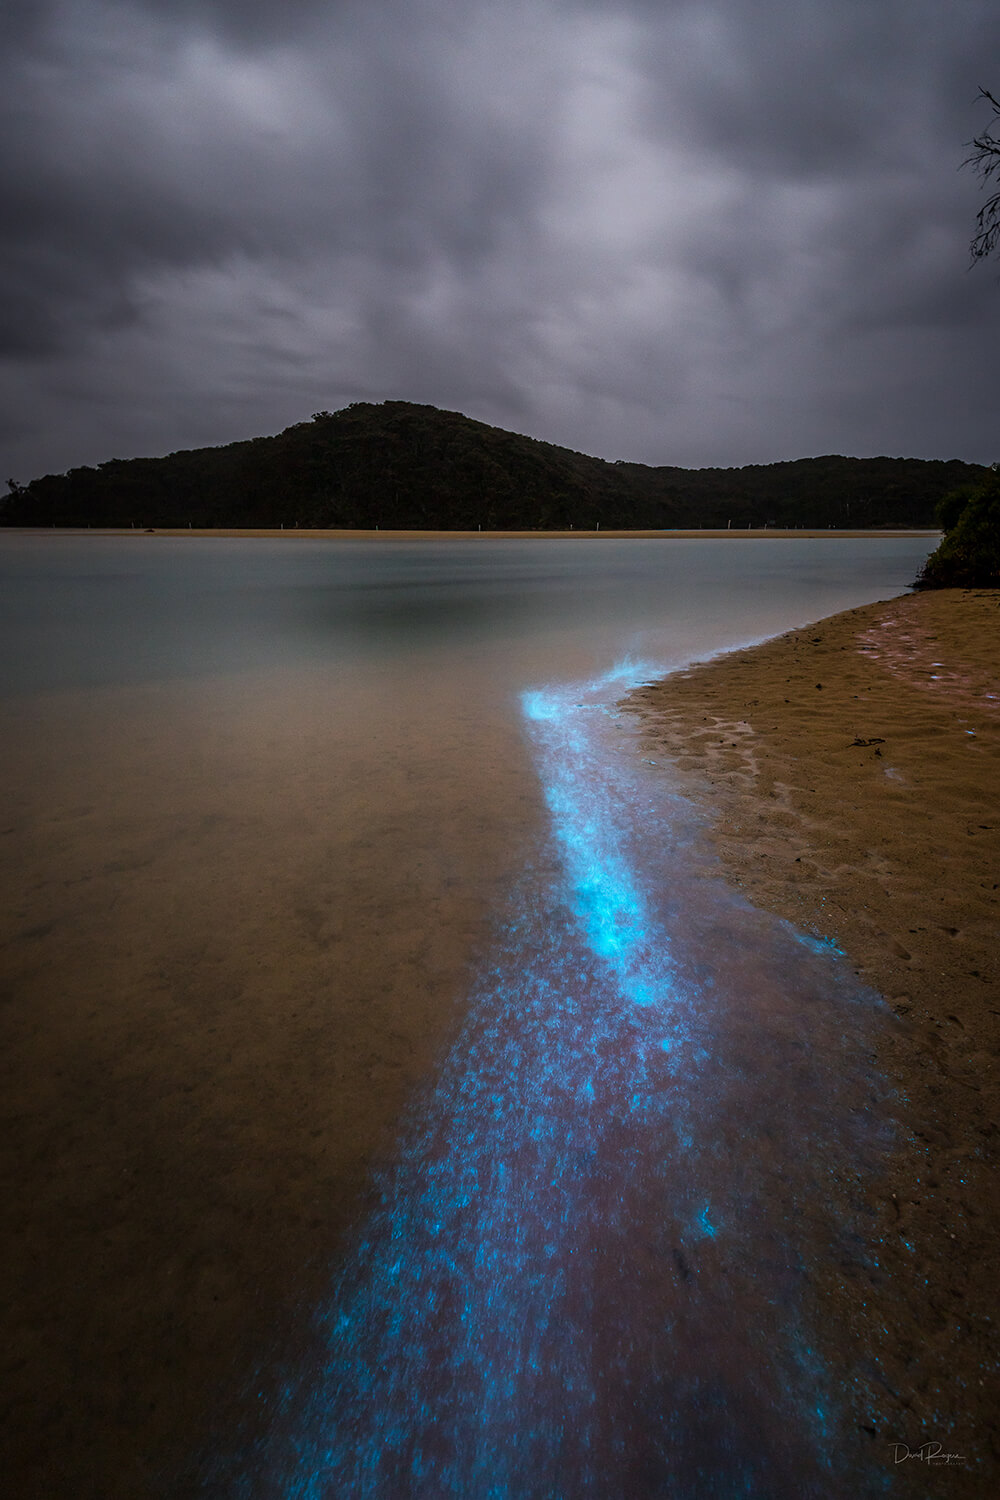 Bioluminescence photo shot on a EOS 6D Mark II and EF 16-35mm f/4L IS USM Lens by Davey Rogers